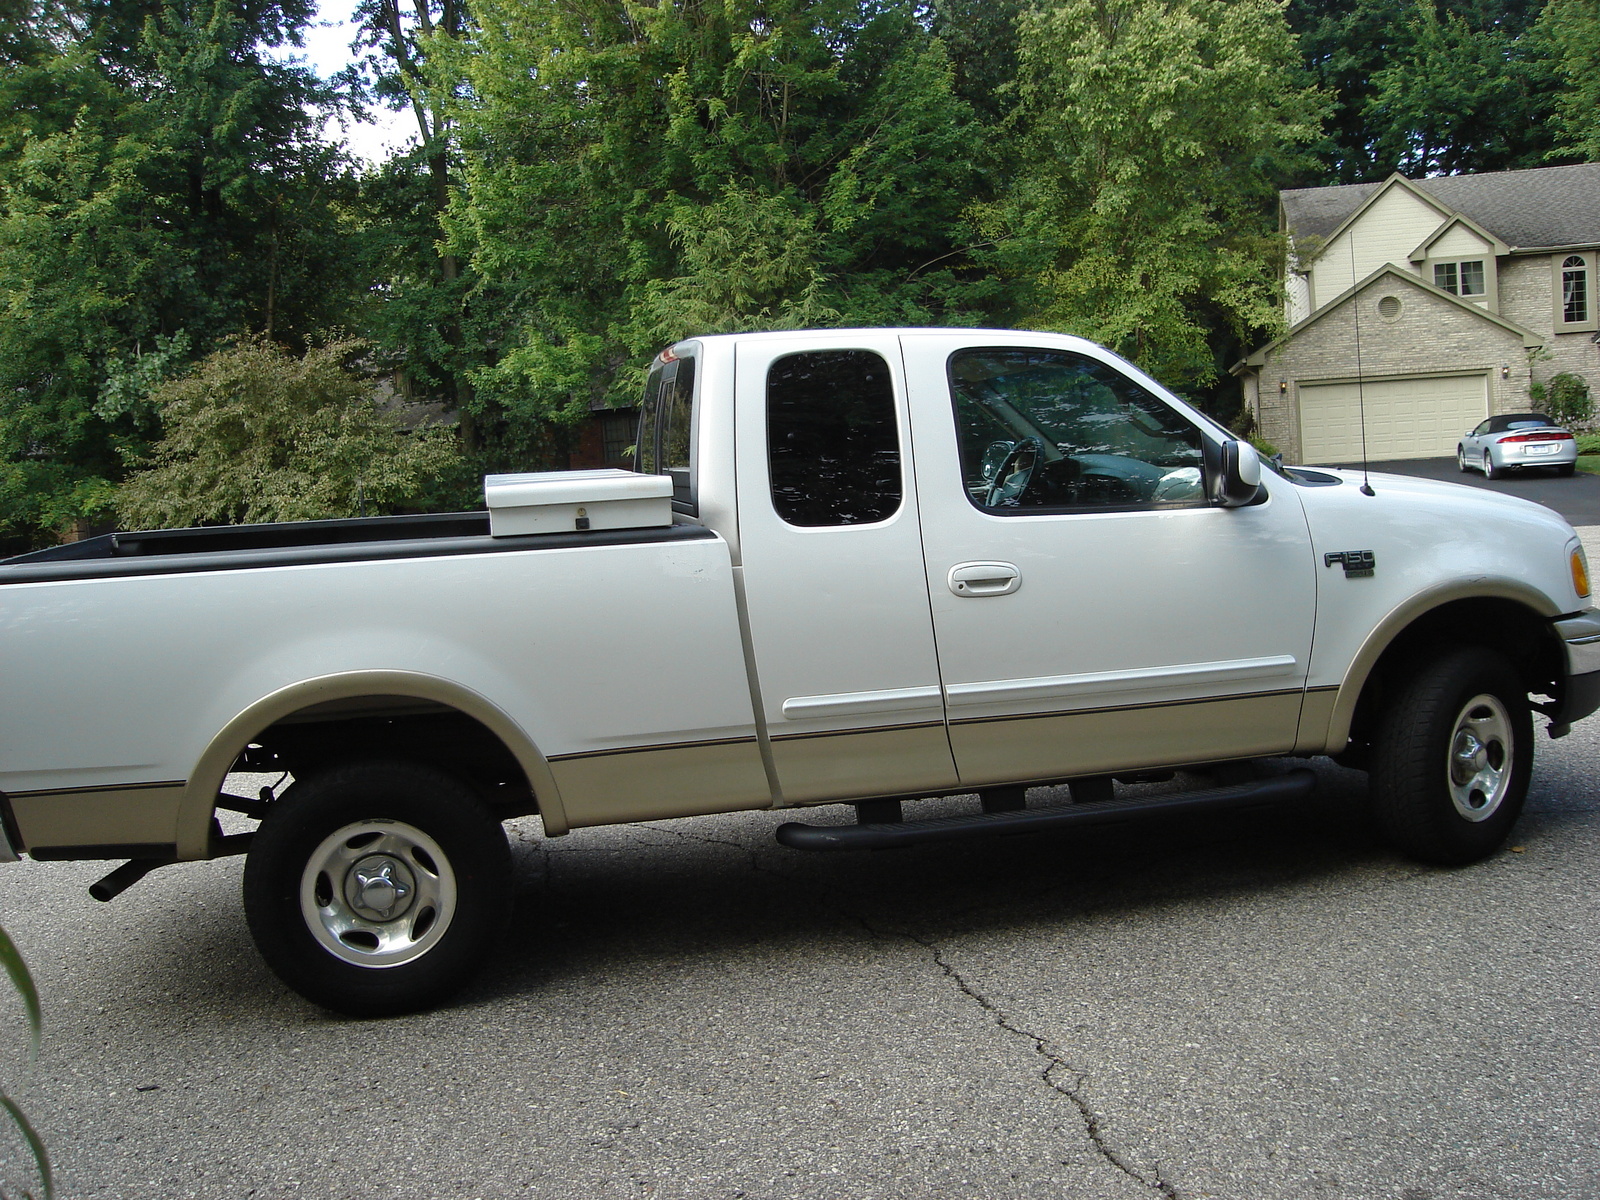 1999 Ford f150 extended cab review #7